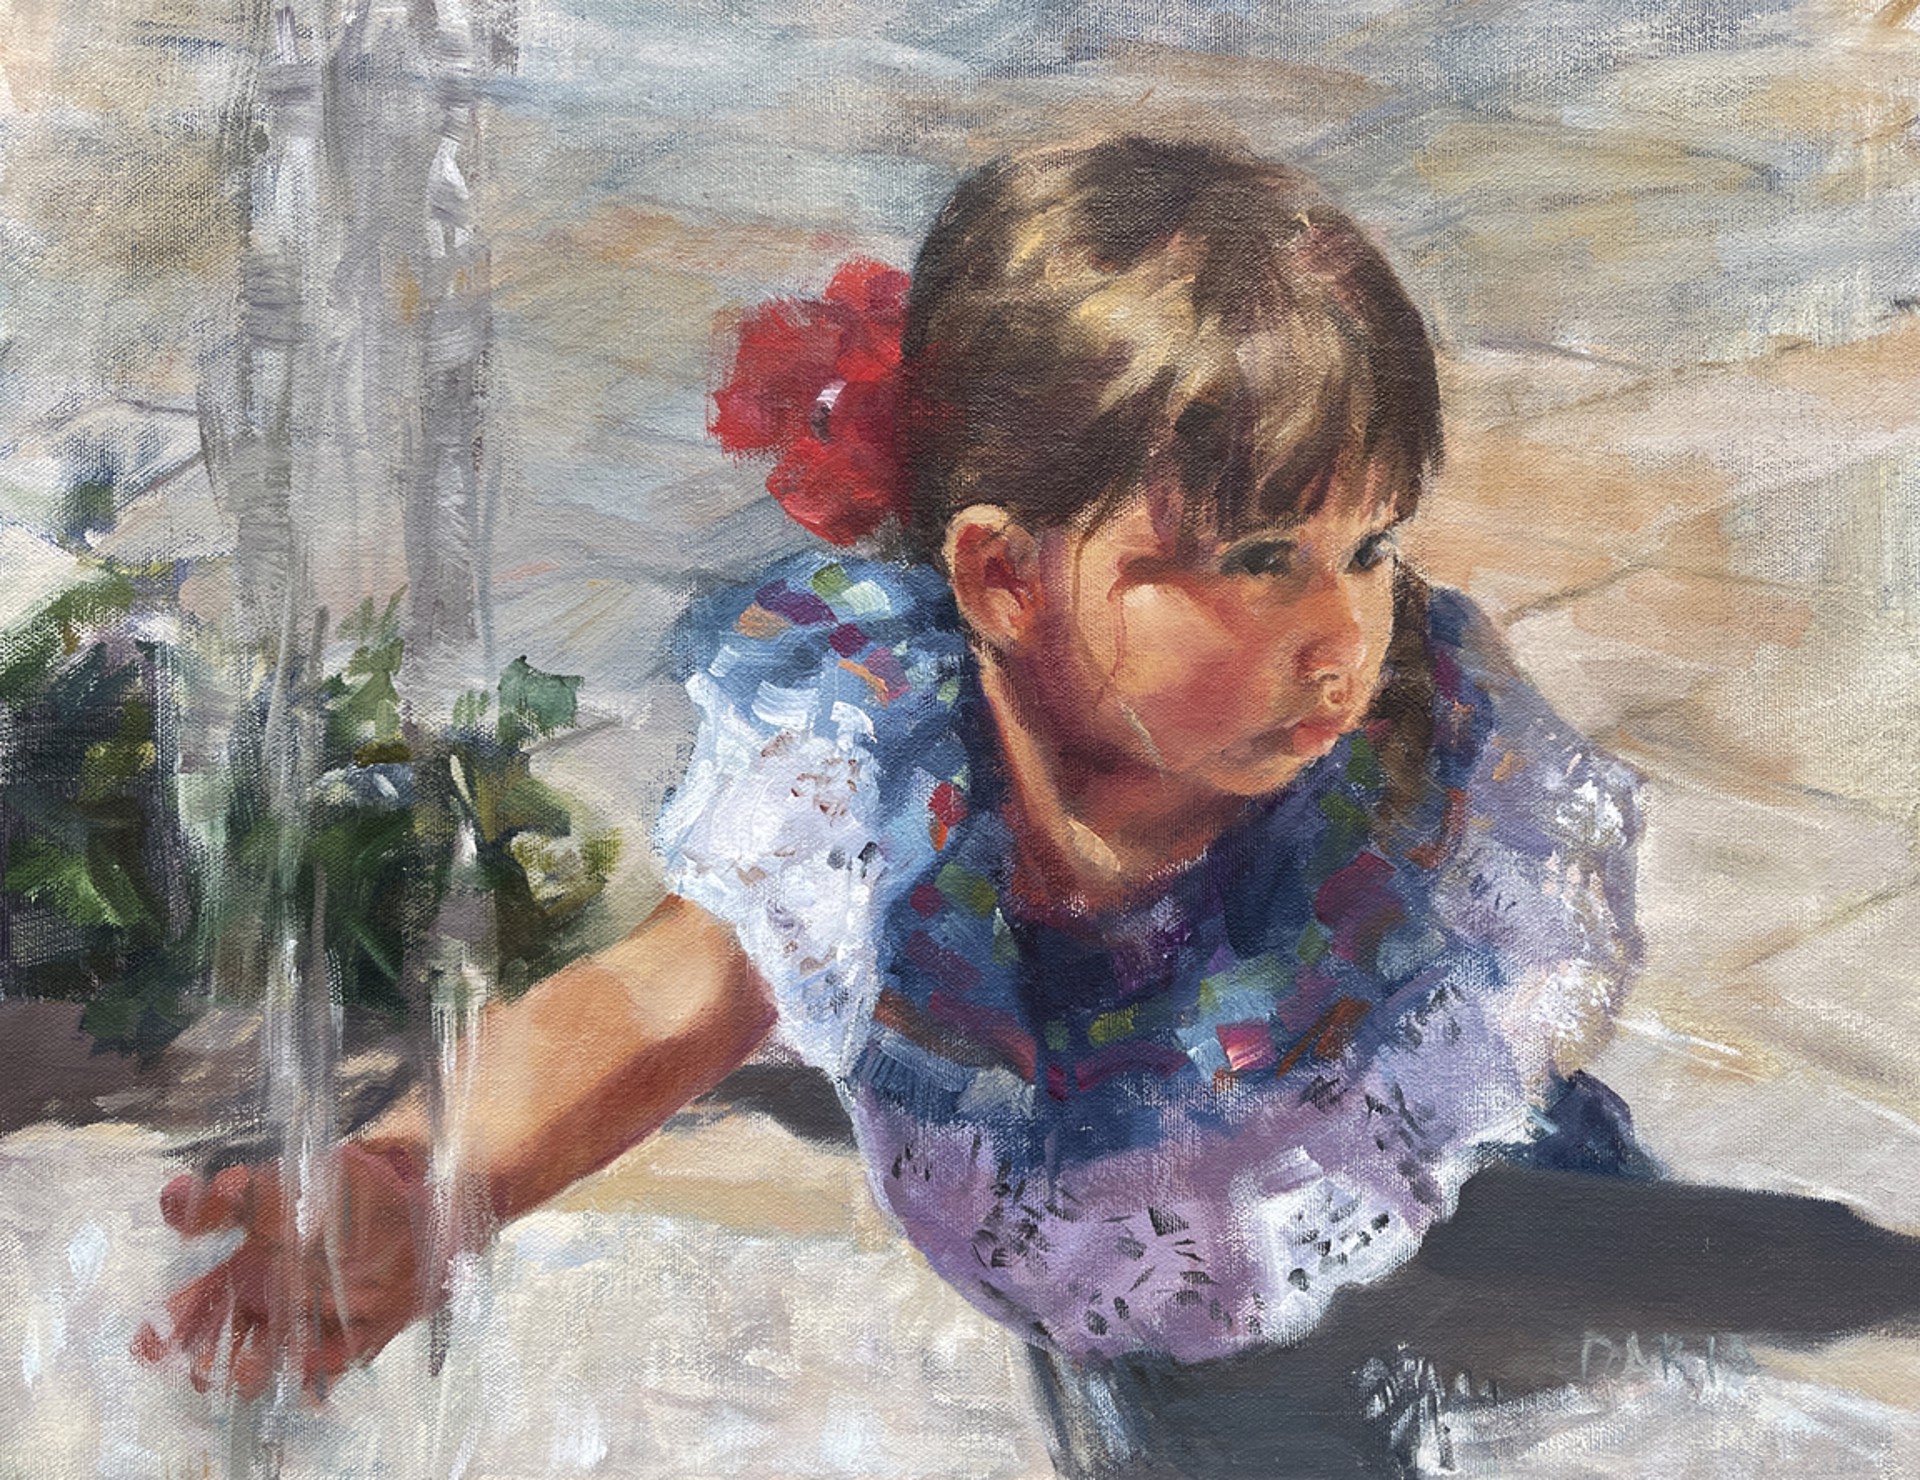 Young Girl at Fountain by Daria Shachmut